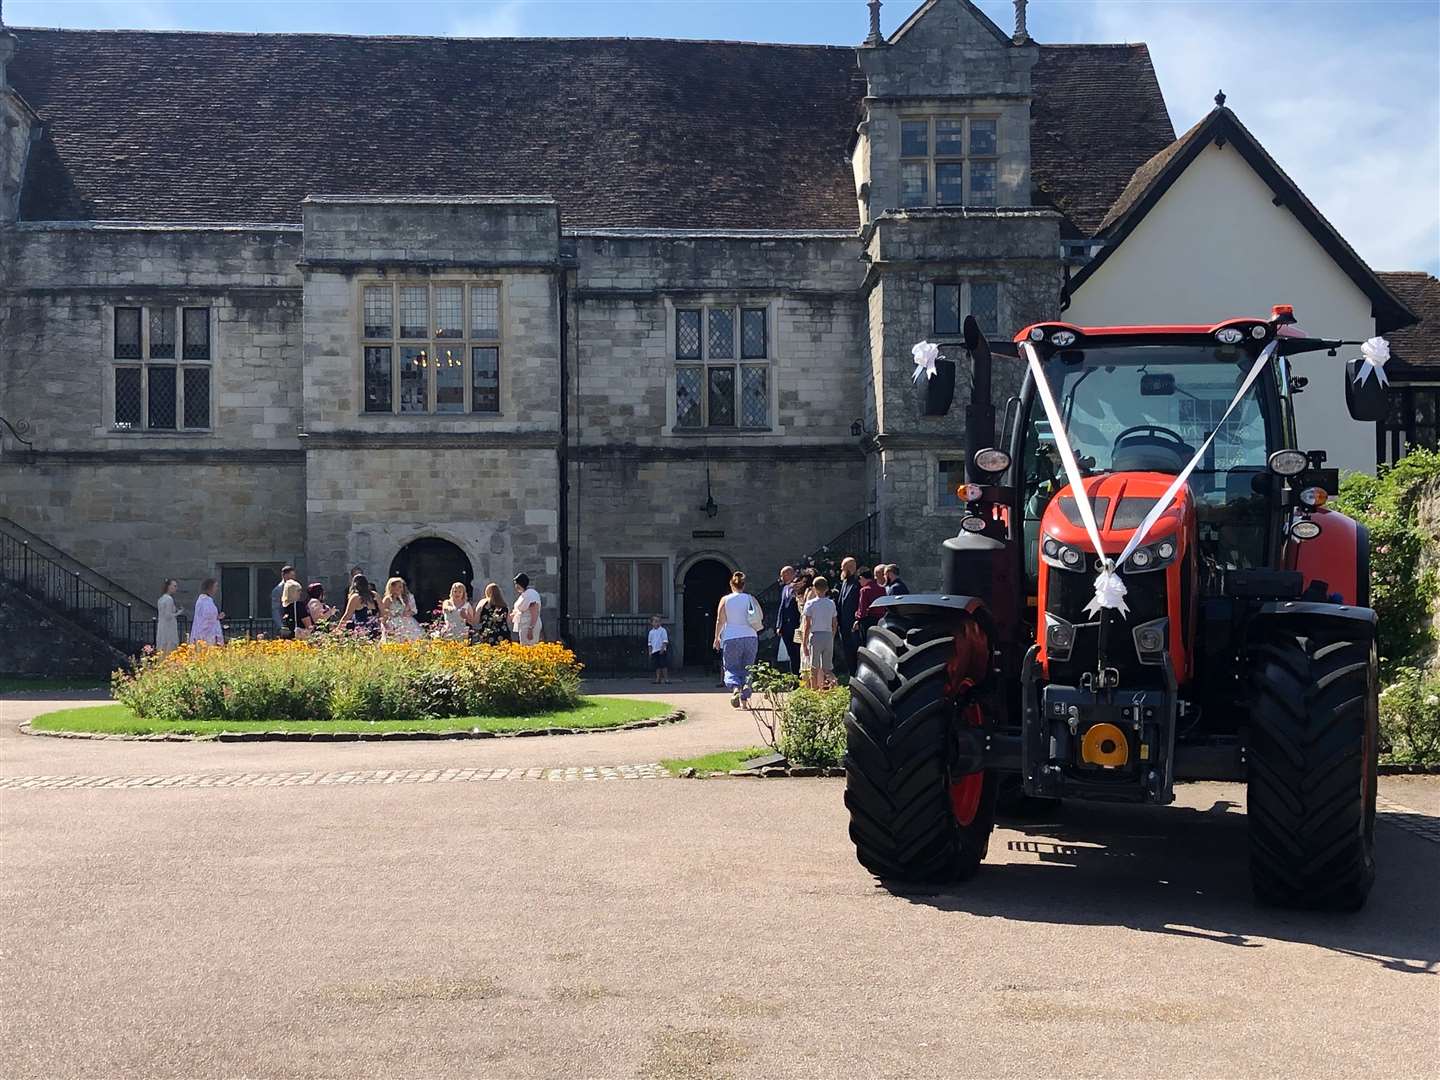 The tractor outside Archbishop's Palace in Maidstone took the groom to his wedding